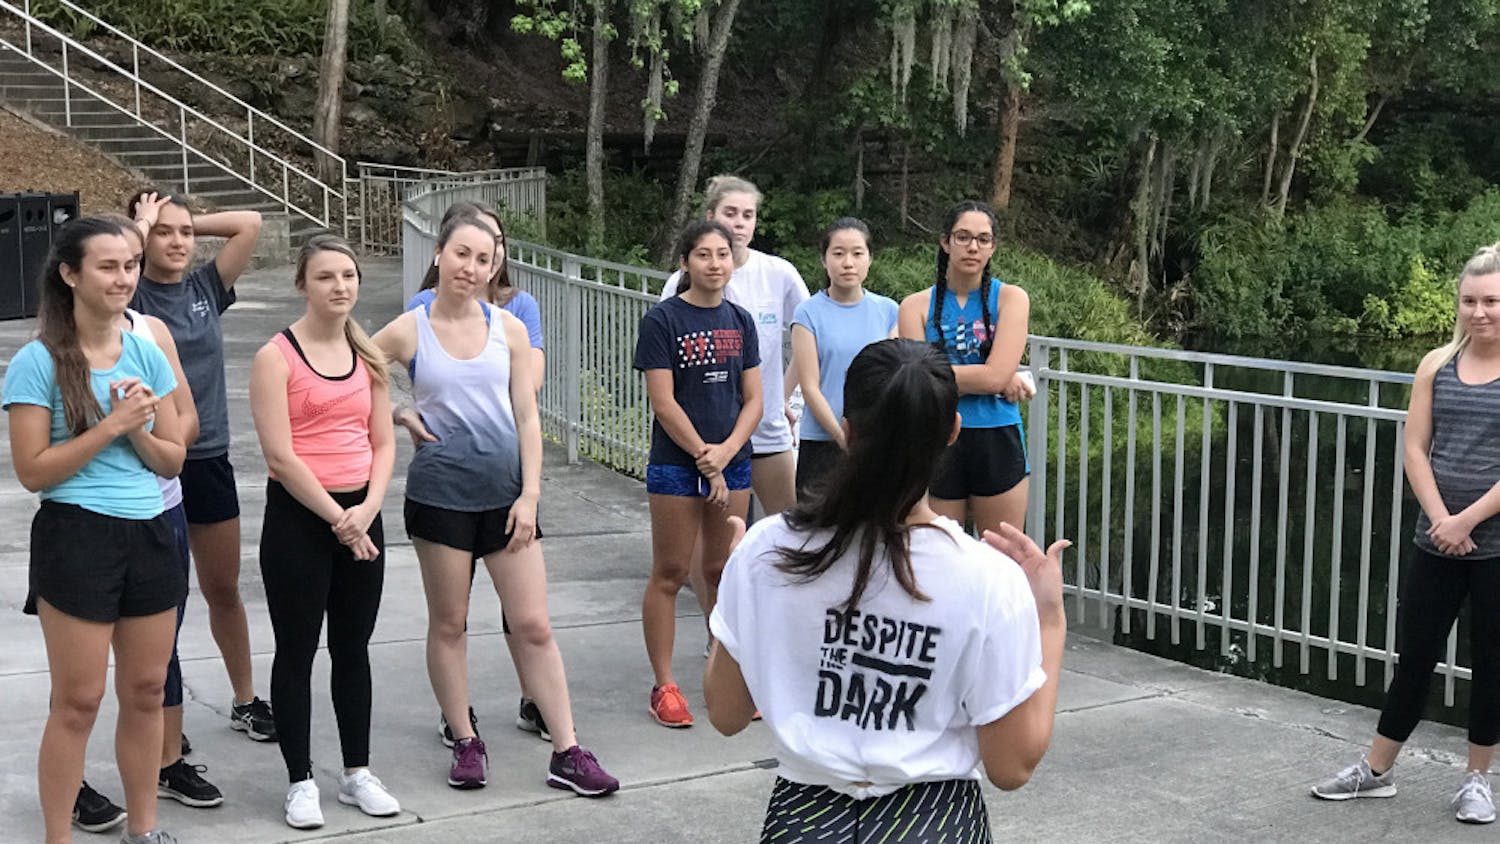 Eighteen runners partook in the first event of the UF chapter of Despite the Dark. The group’s goal is to encourage the conversation and activity of running safely at nigh